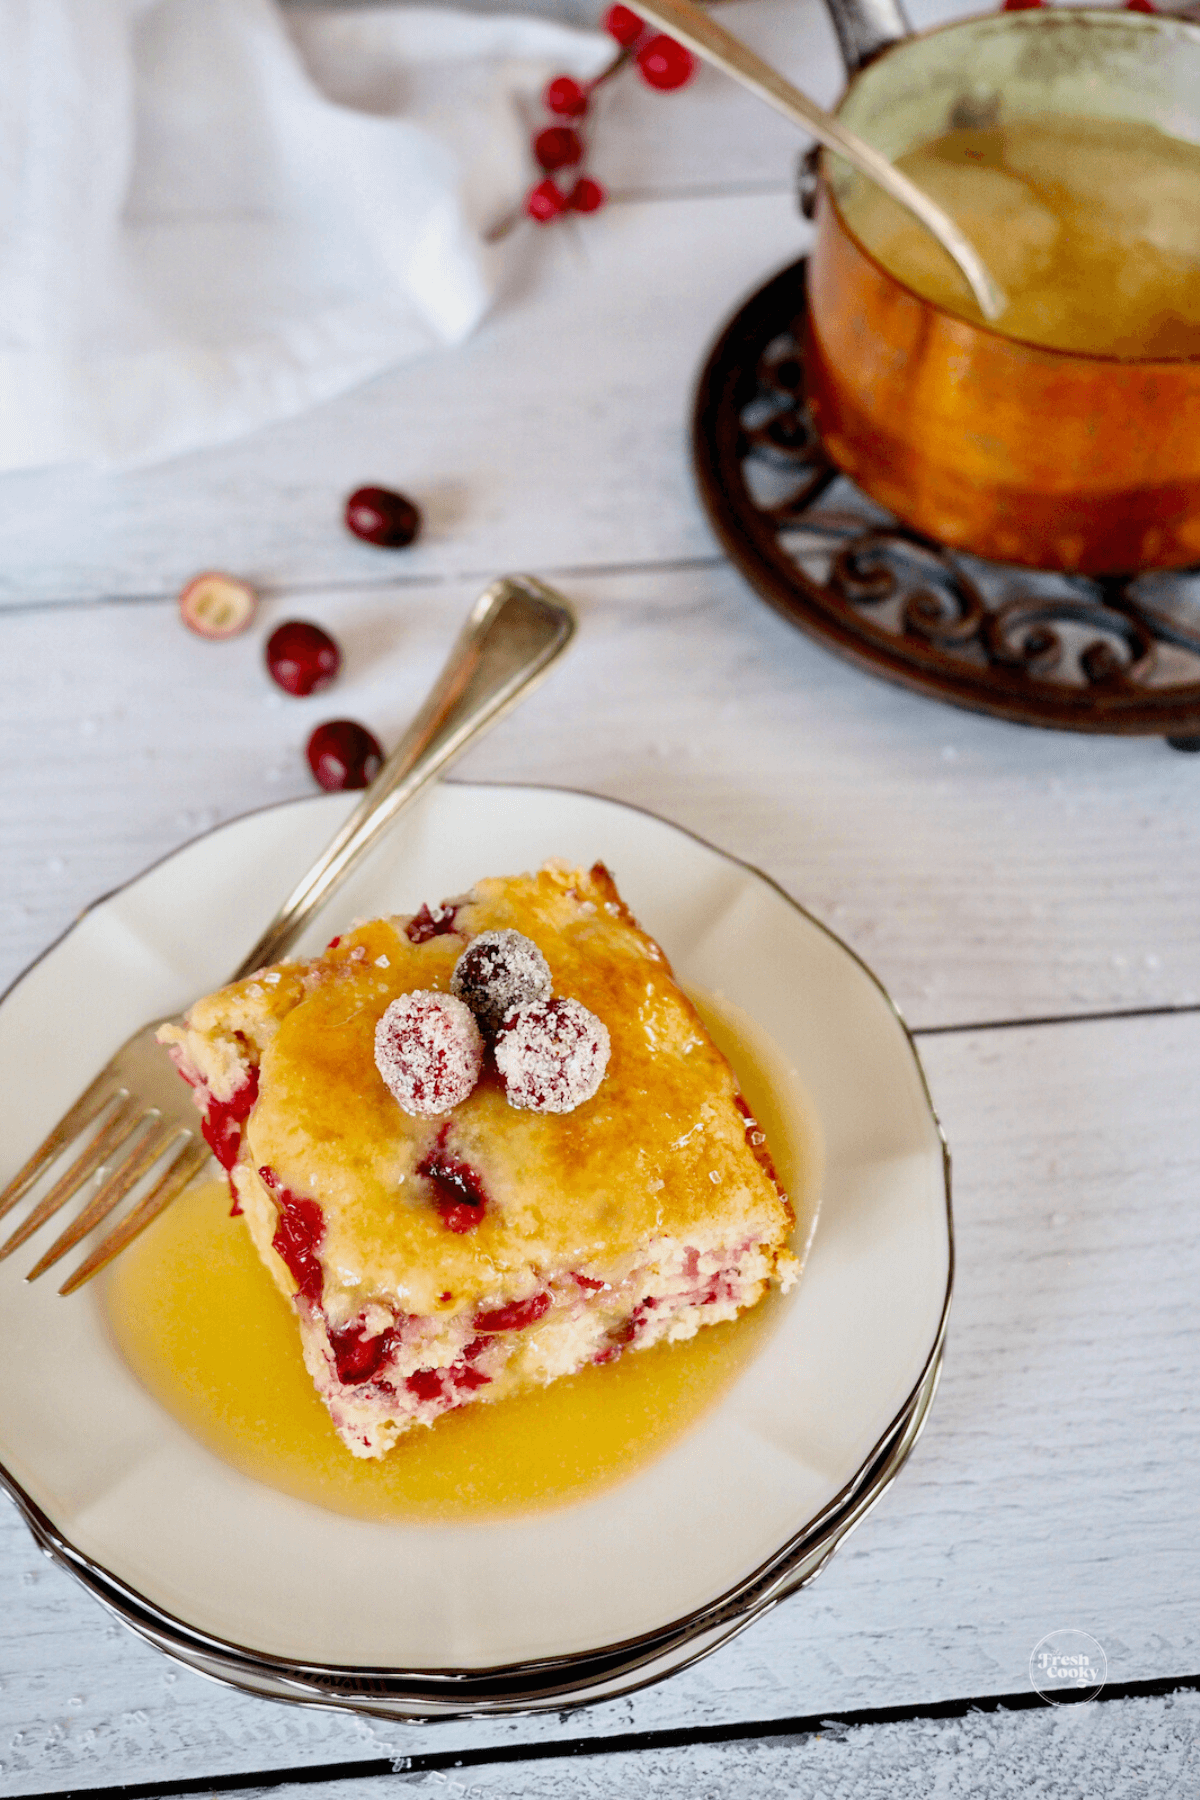 A slice of Christmas cake on a plate drizzled with vanilla sauce and sugared cranberries.